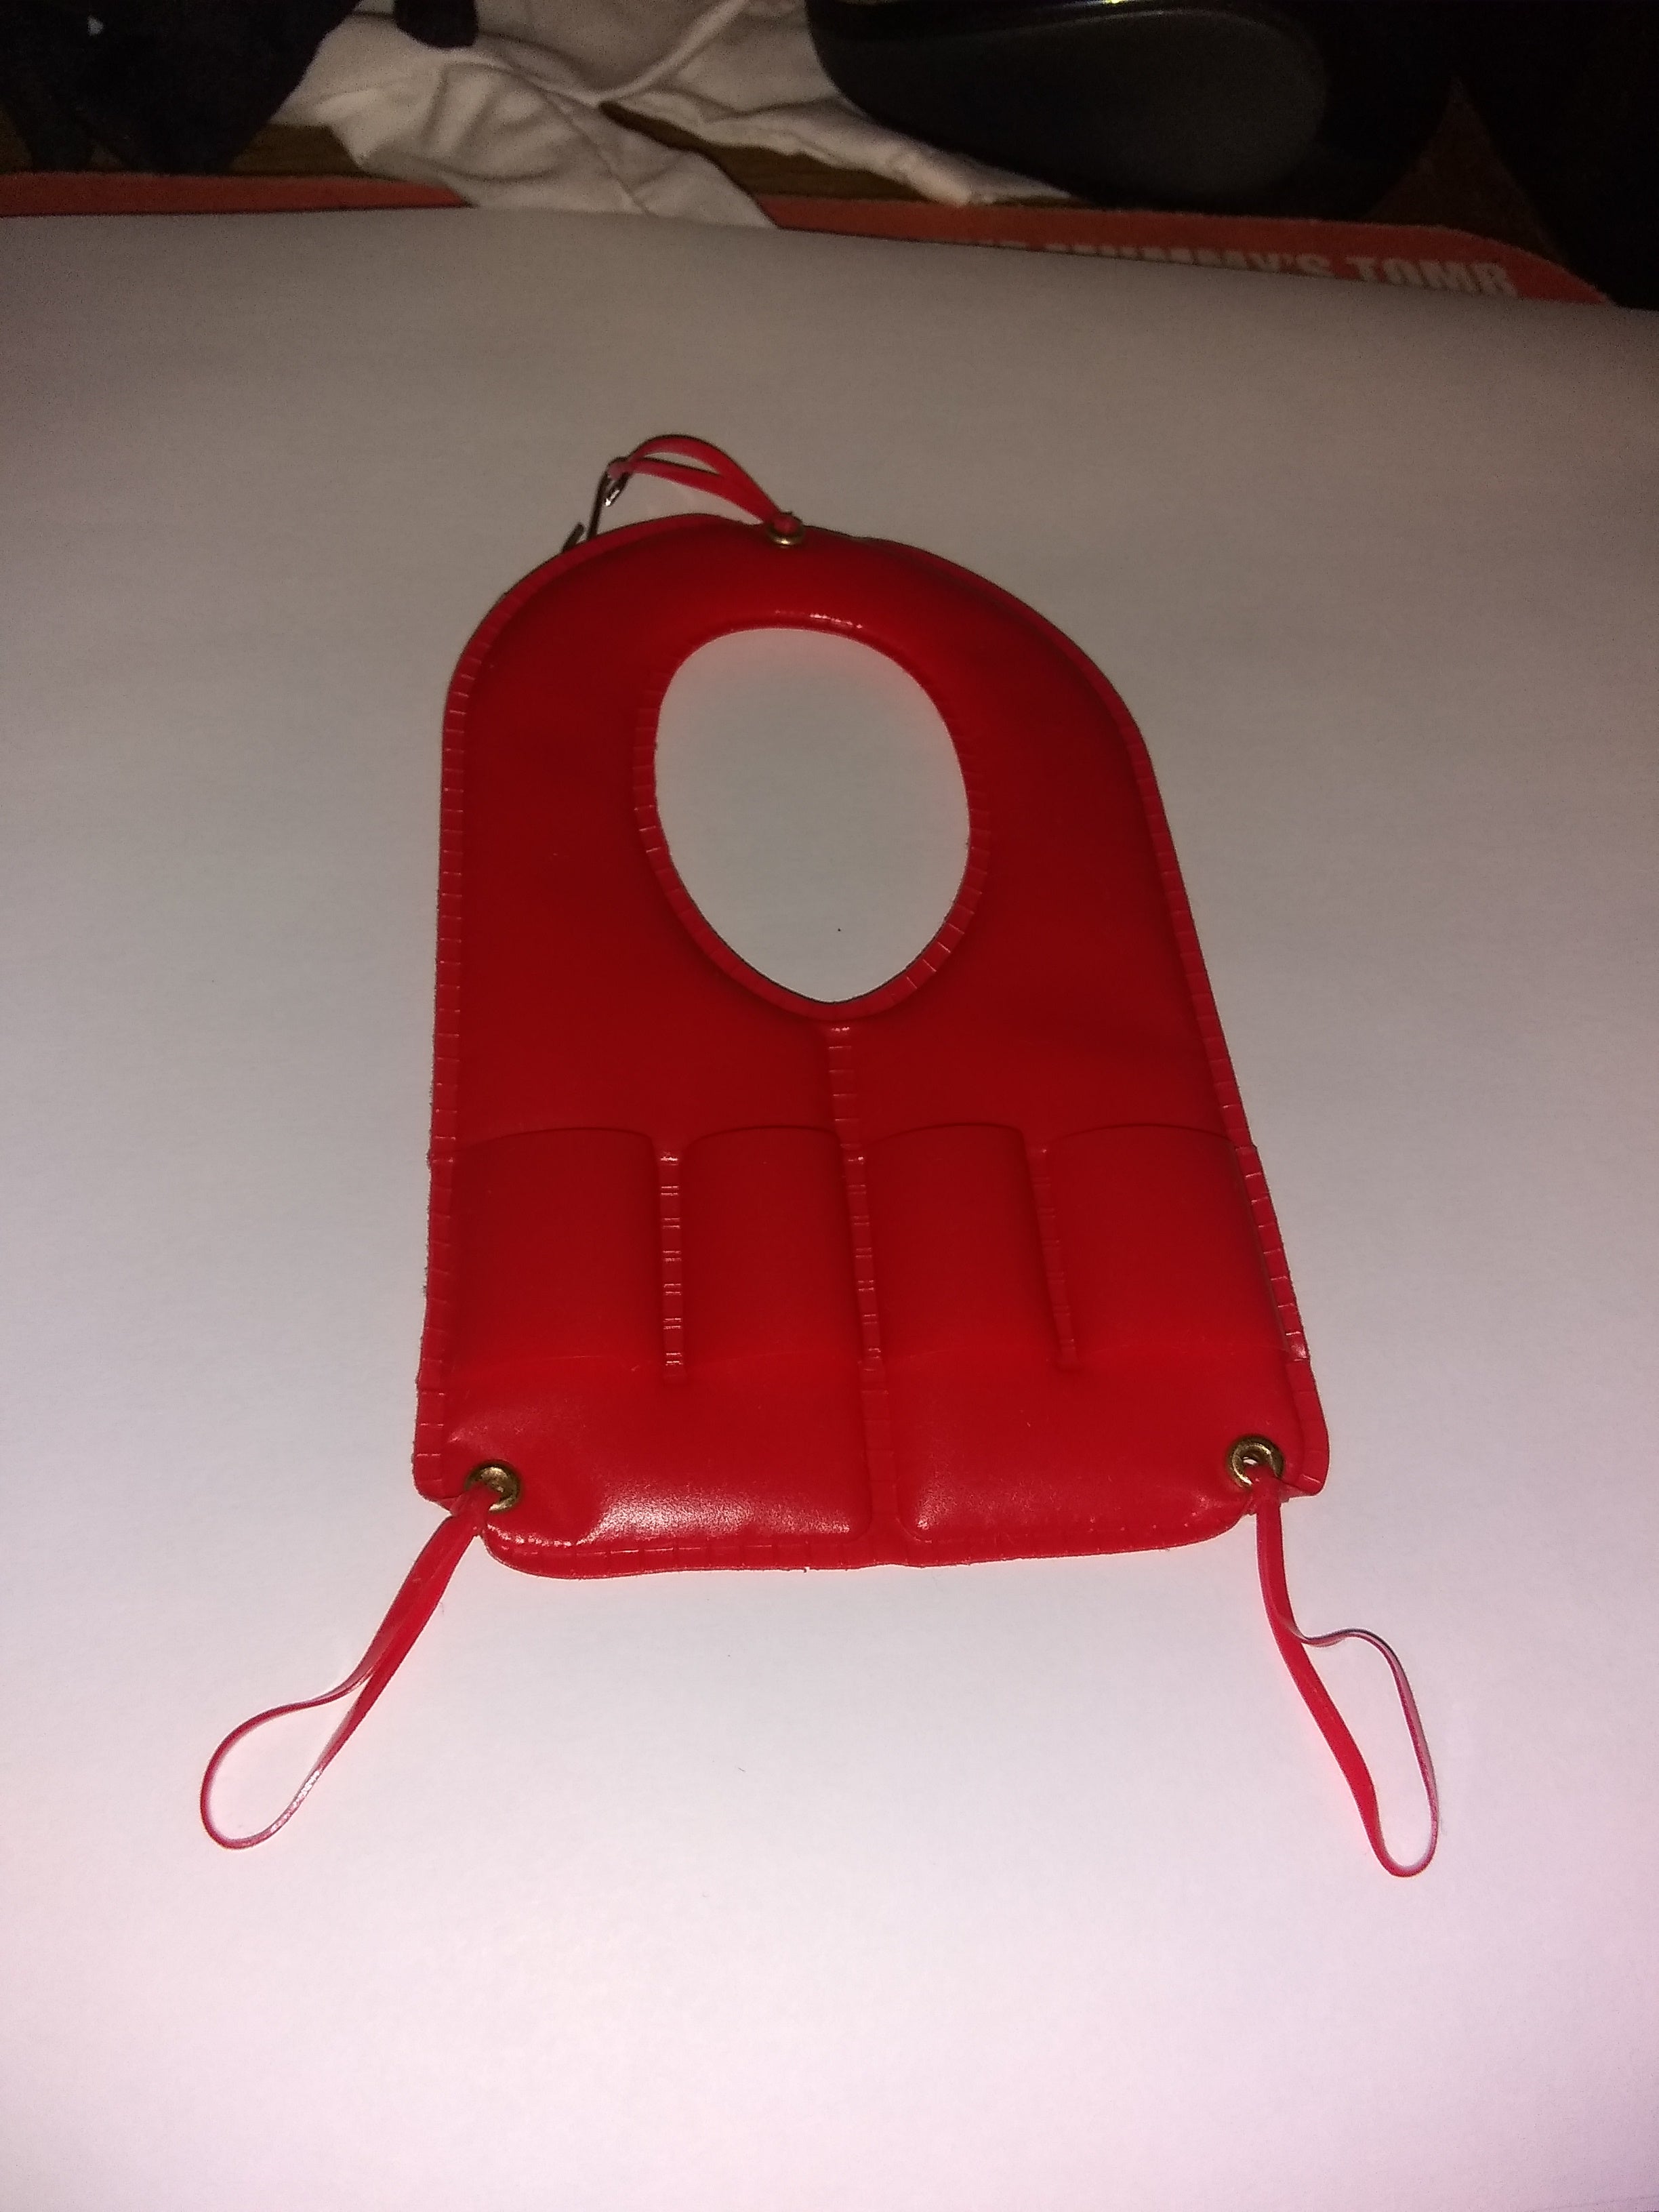 C140 3rd SON Book Alternate color red life vest new production